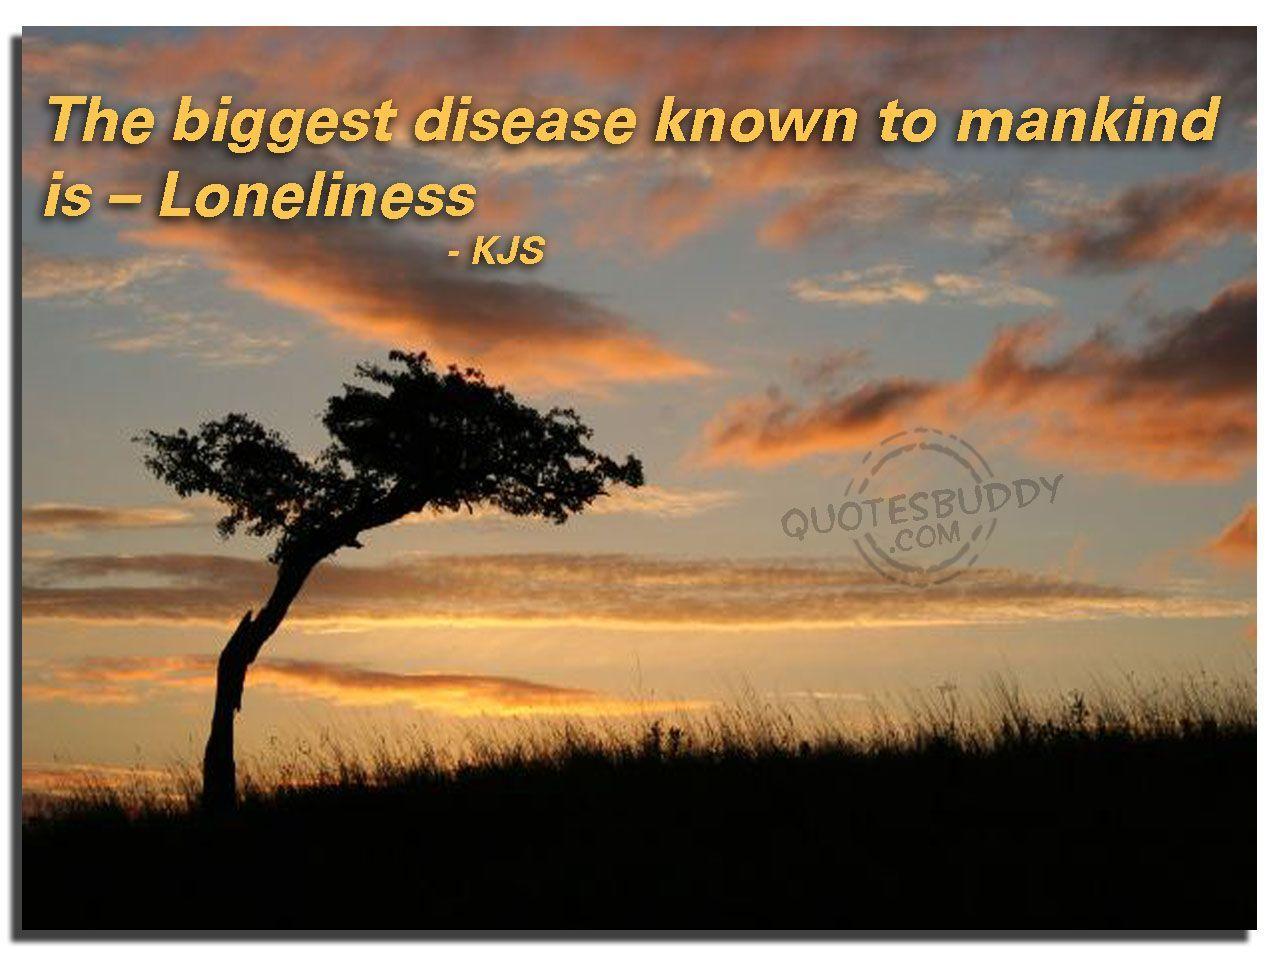 Feeling lonely has been shown to negatively effect our mental